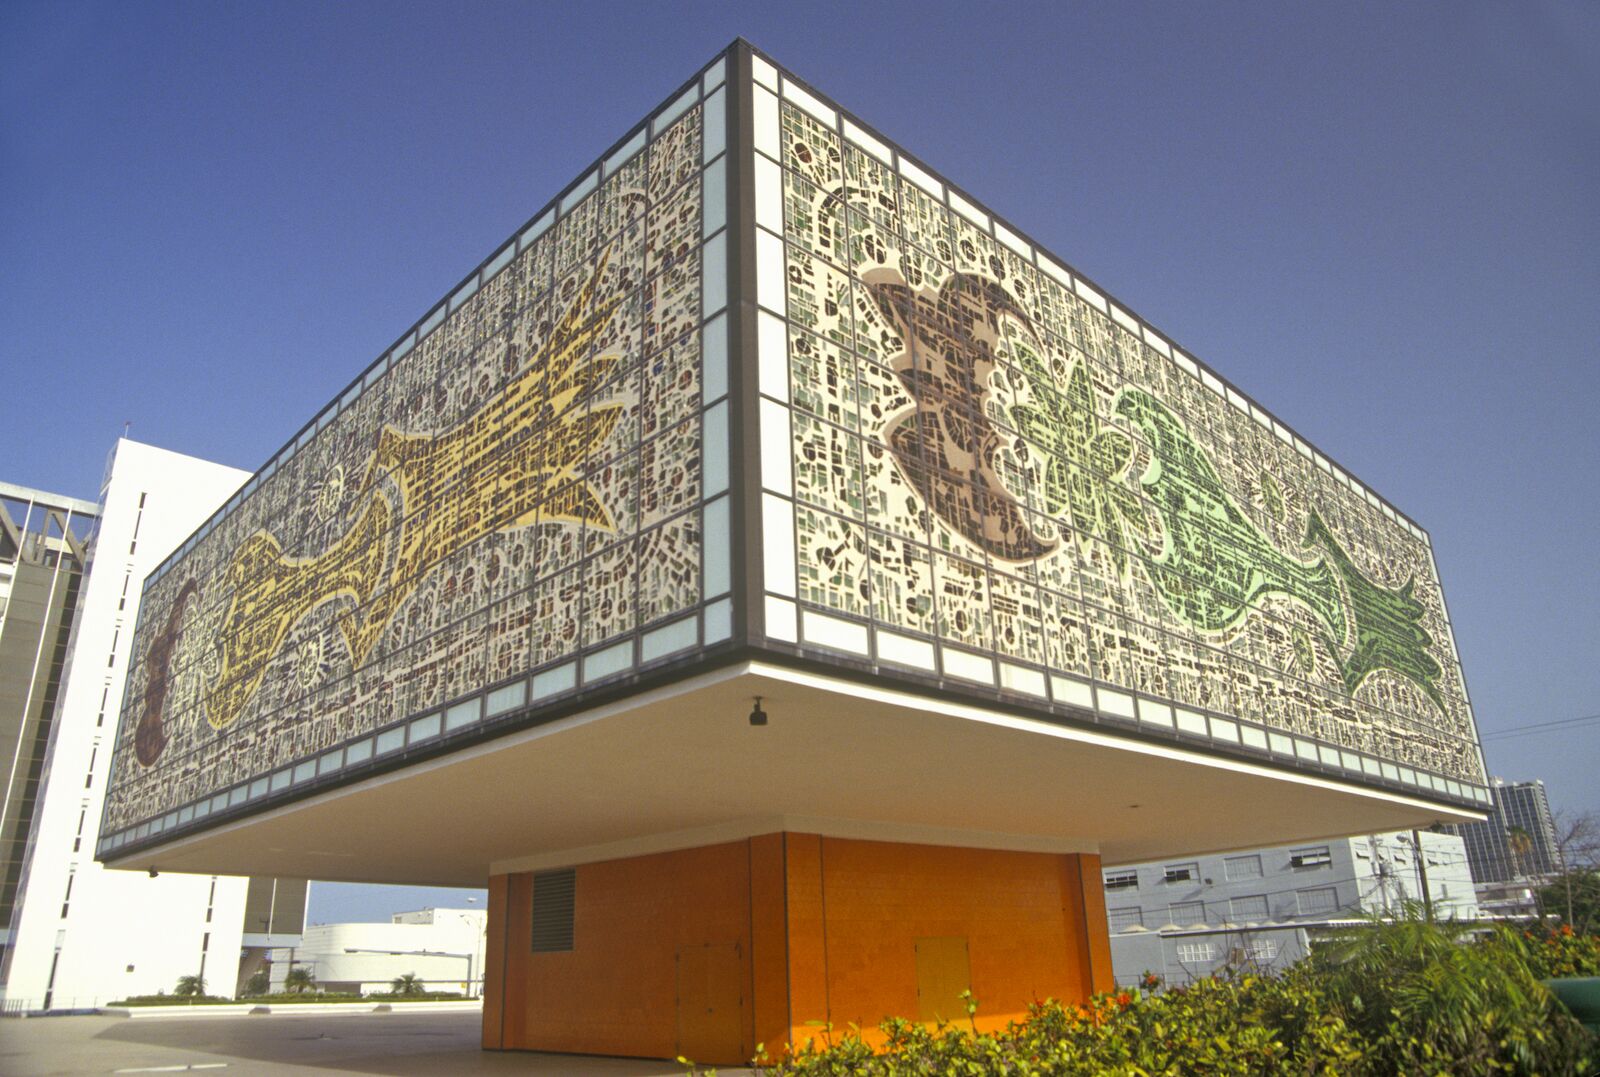 The Bacardi Building is one of Miami's most unusual buildings and a great stop on a Miami architecture tour.